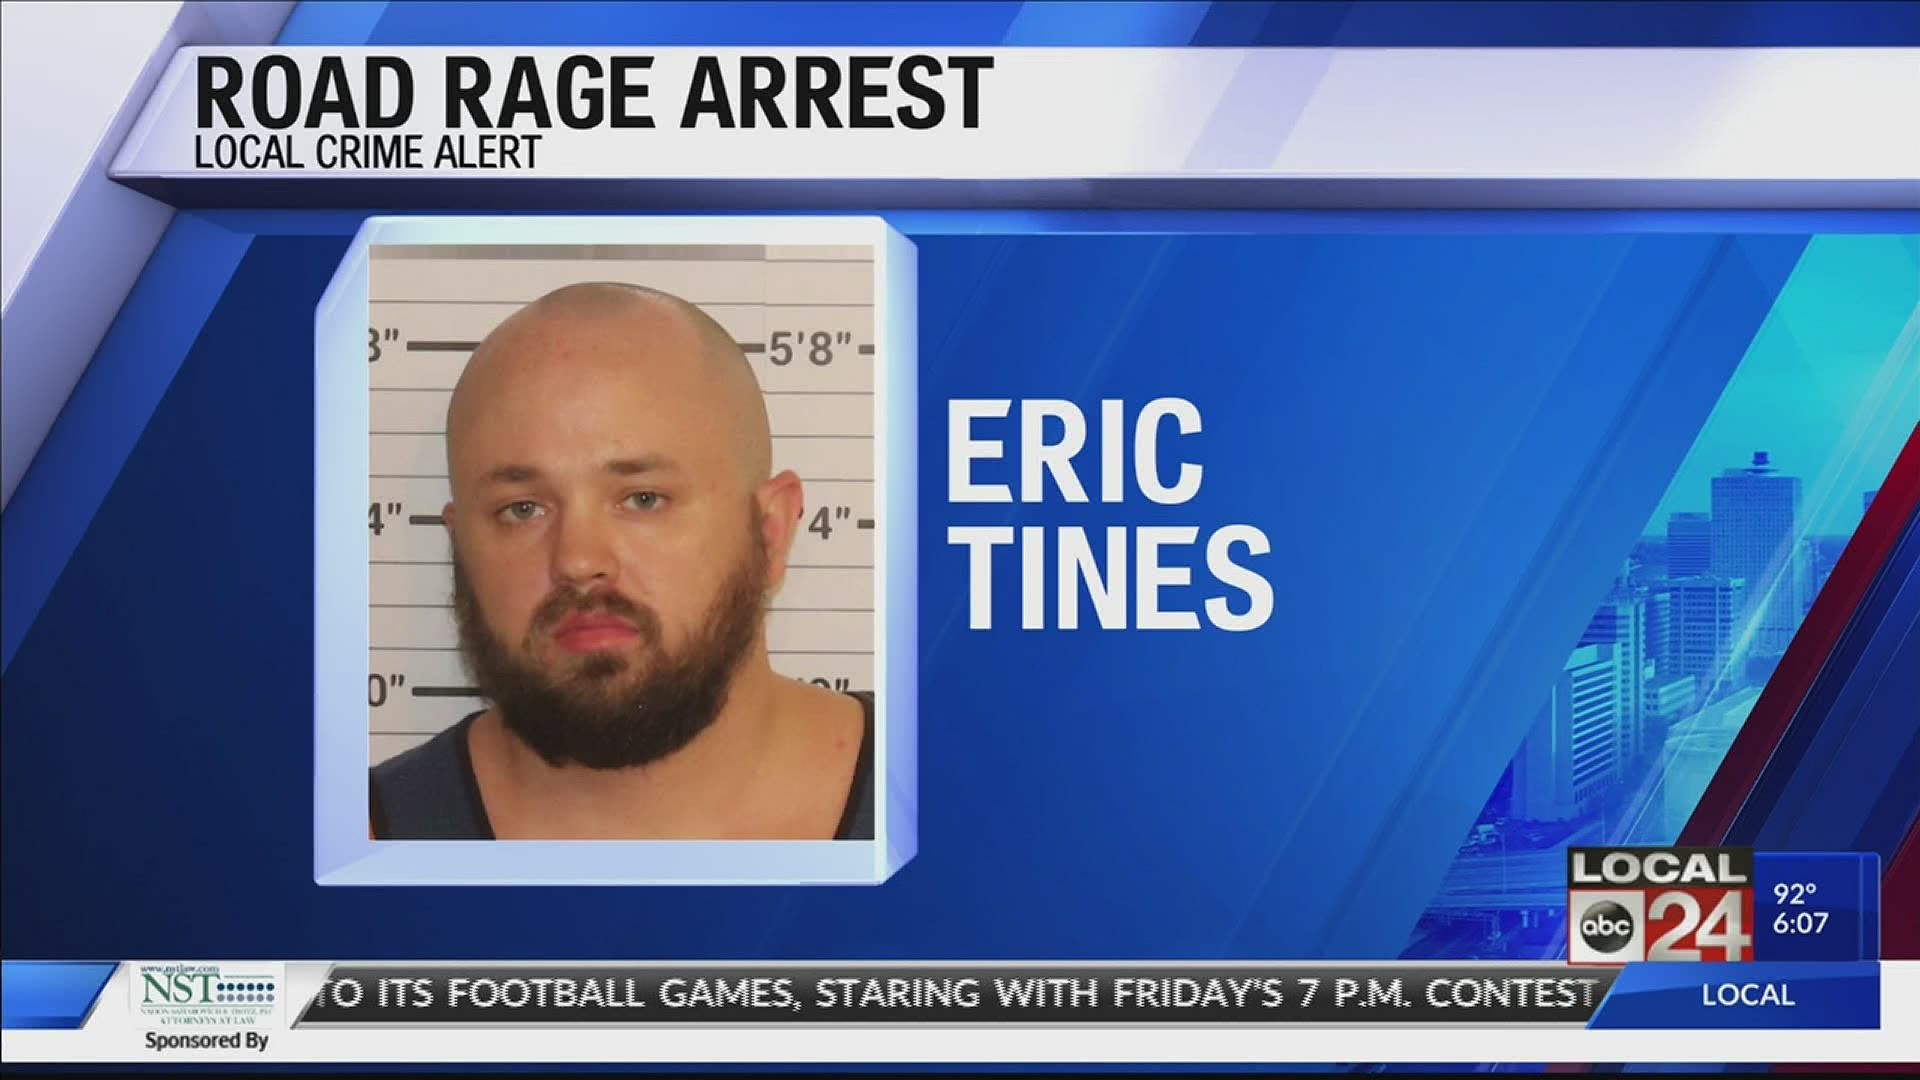 Police say Eric Tines admitted to firing a shot after he was cut off and the other driver showed a gun.